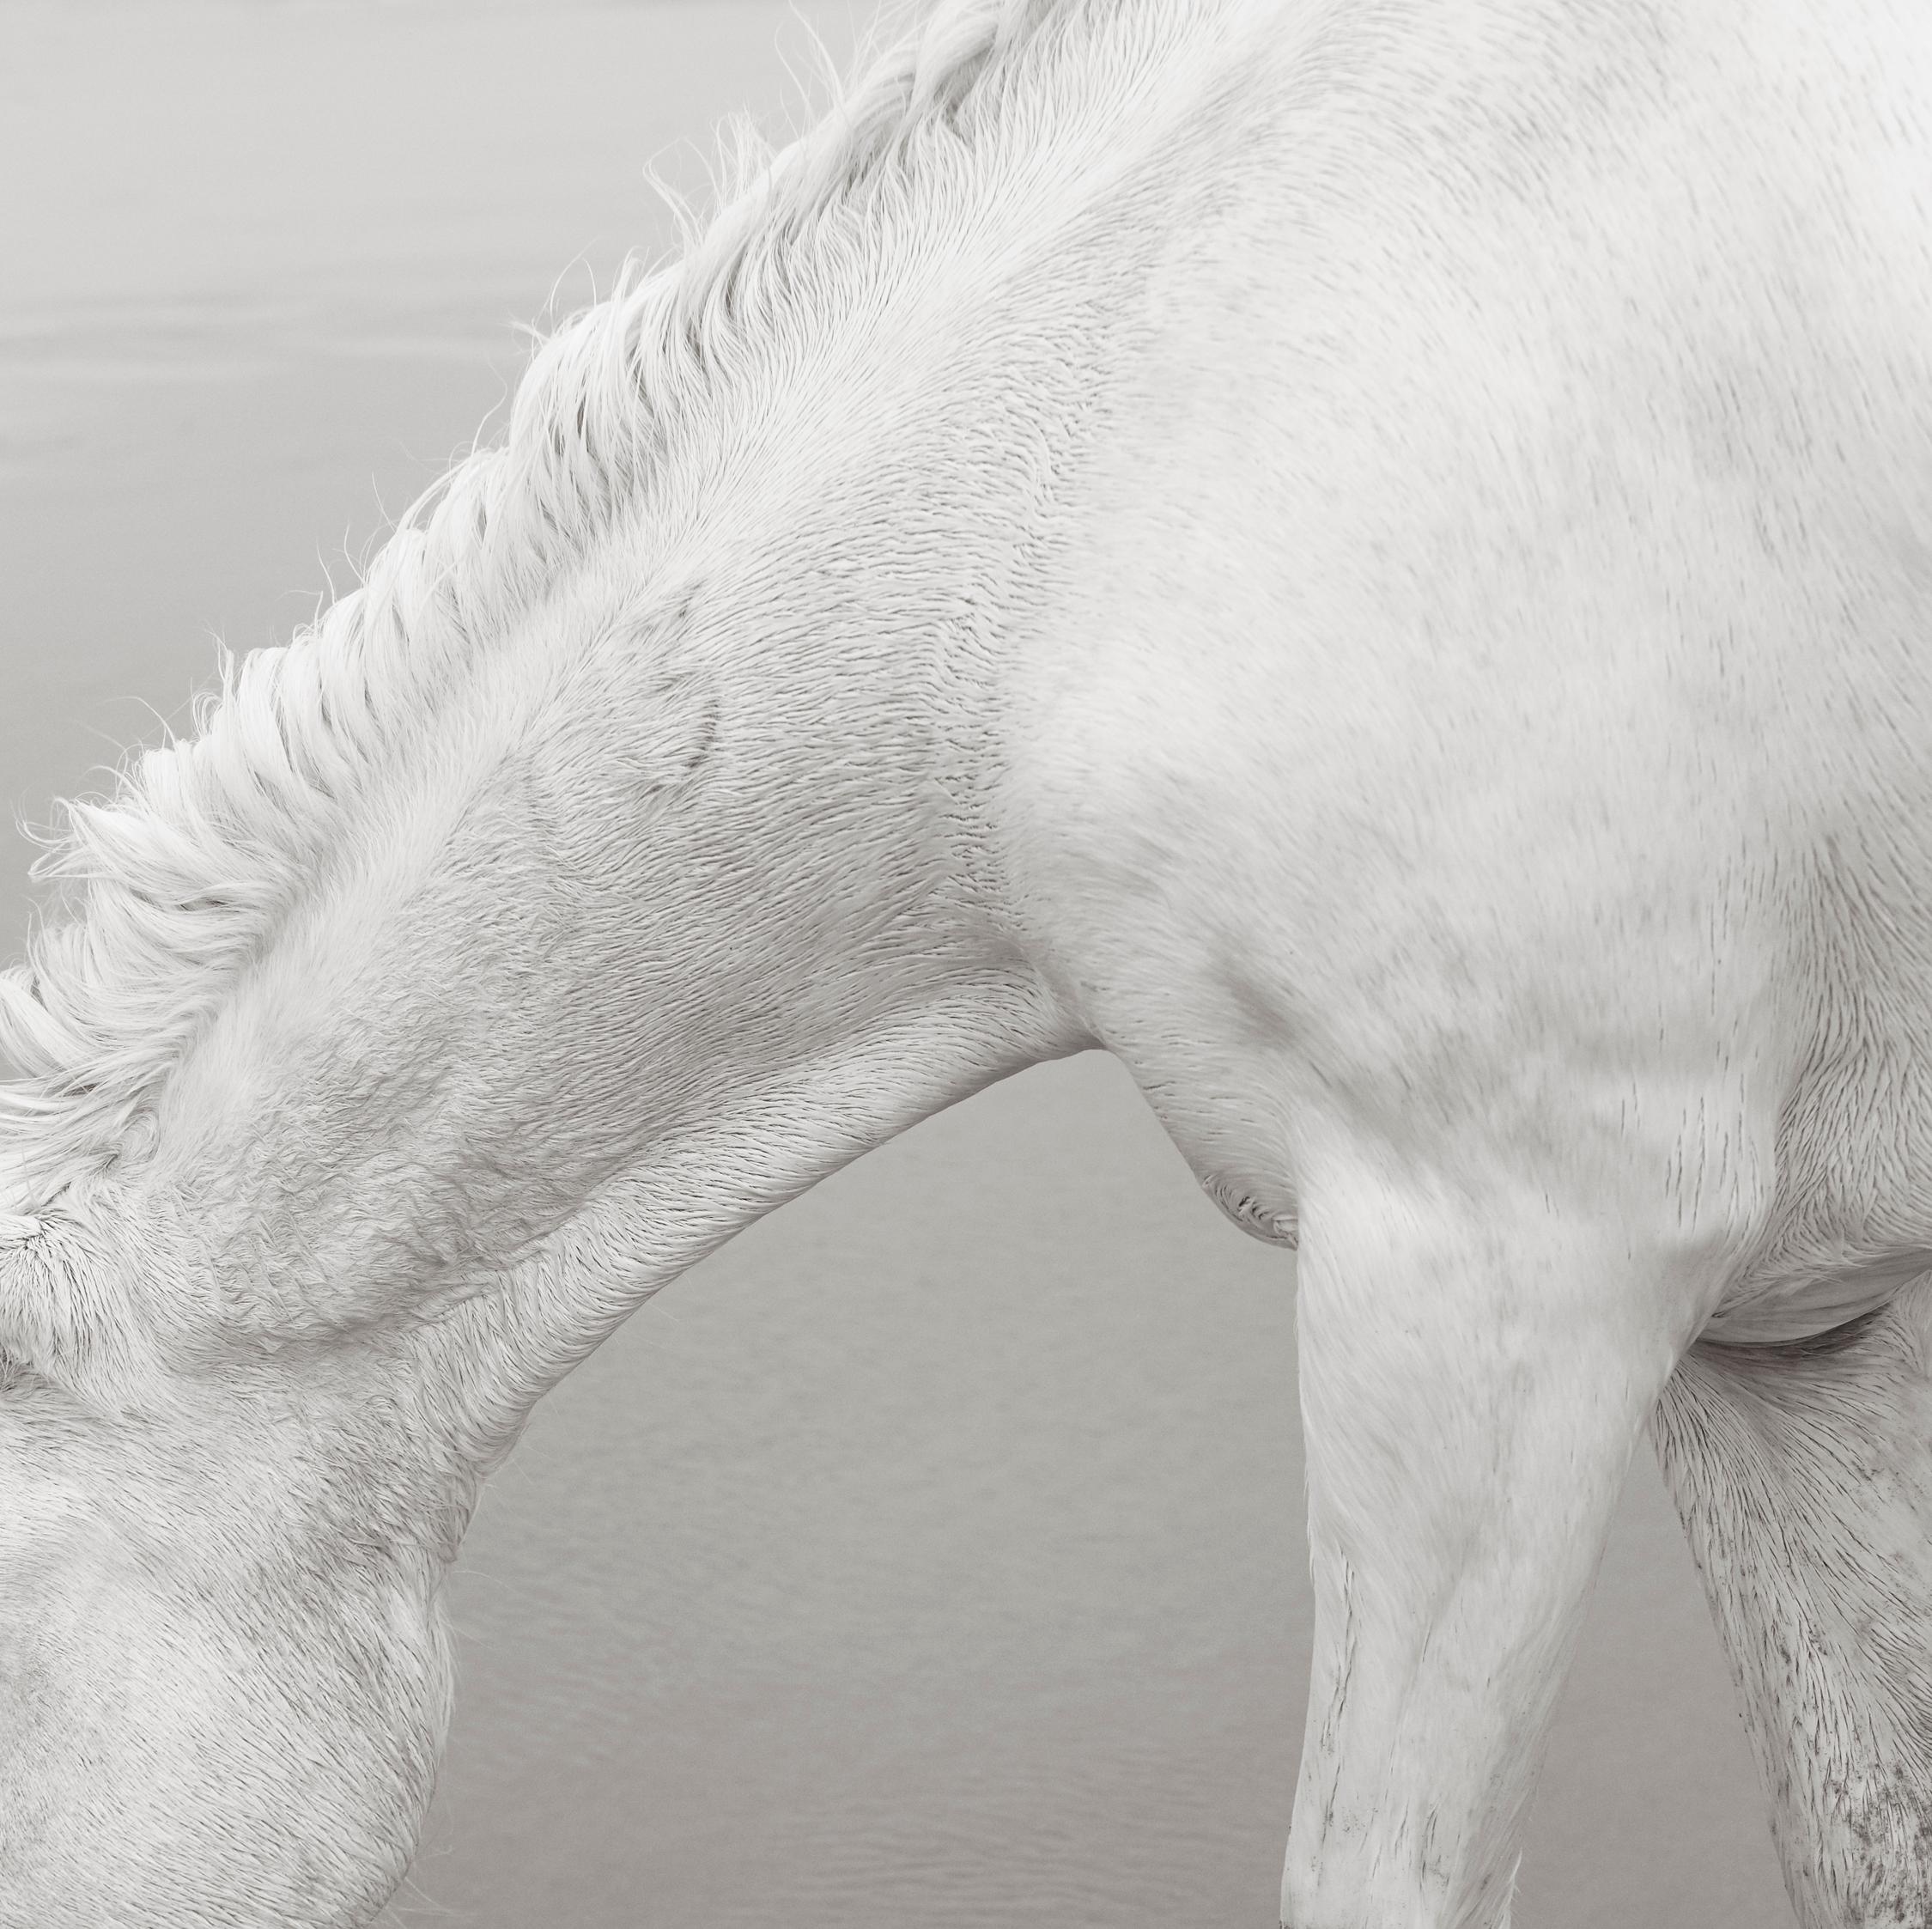 Drew Doggett Black and White Photograph - The beautiful, delicate, and strong neck of an all-white Camargue horse with a b